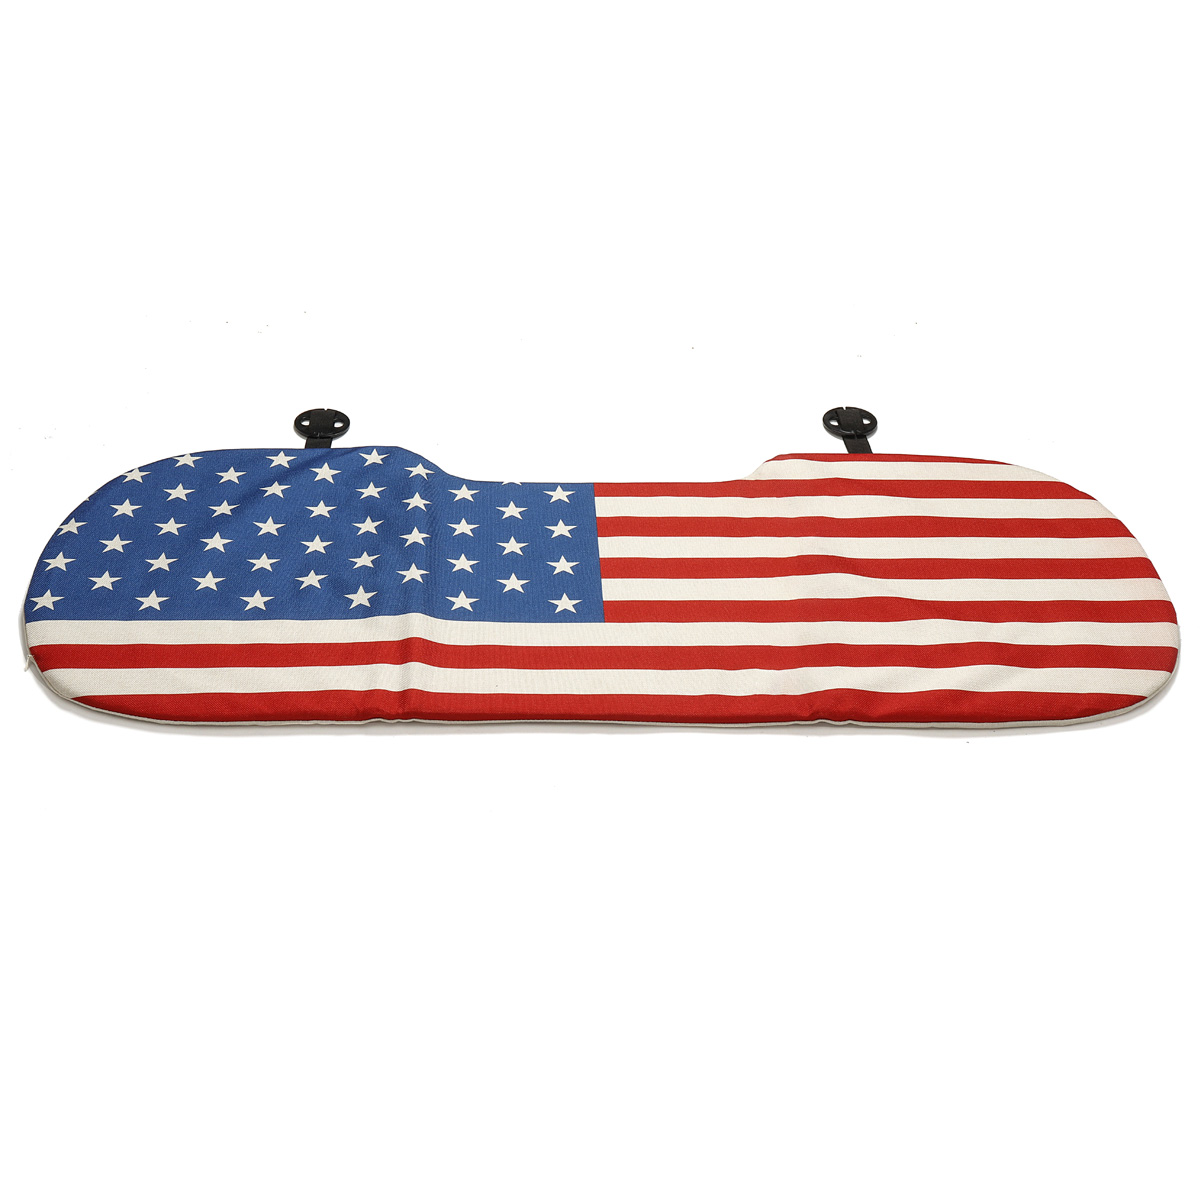 National Flag Style Car Rear Seat Cushion Pad Protector Breathable Anti-Slip Chair Cover Universal - Auto GoShop